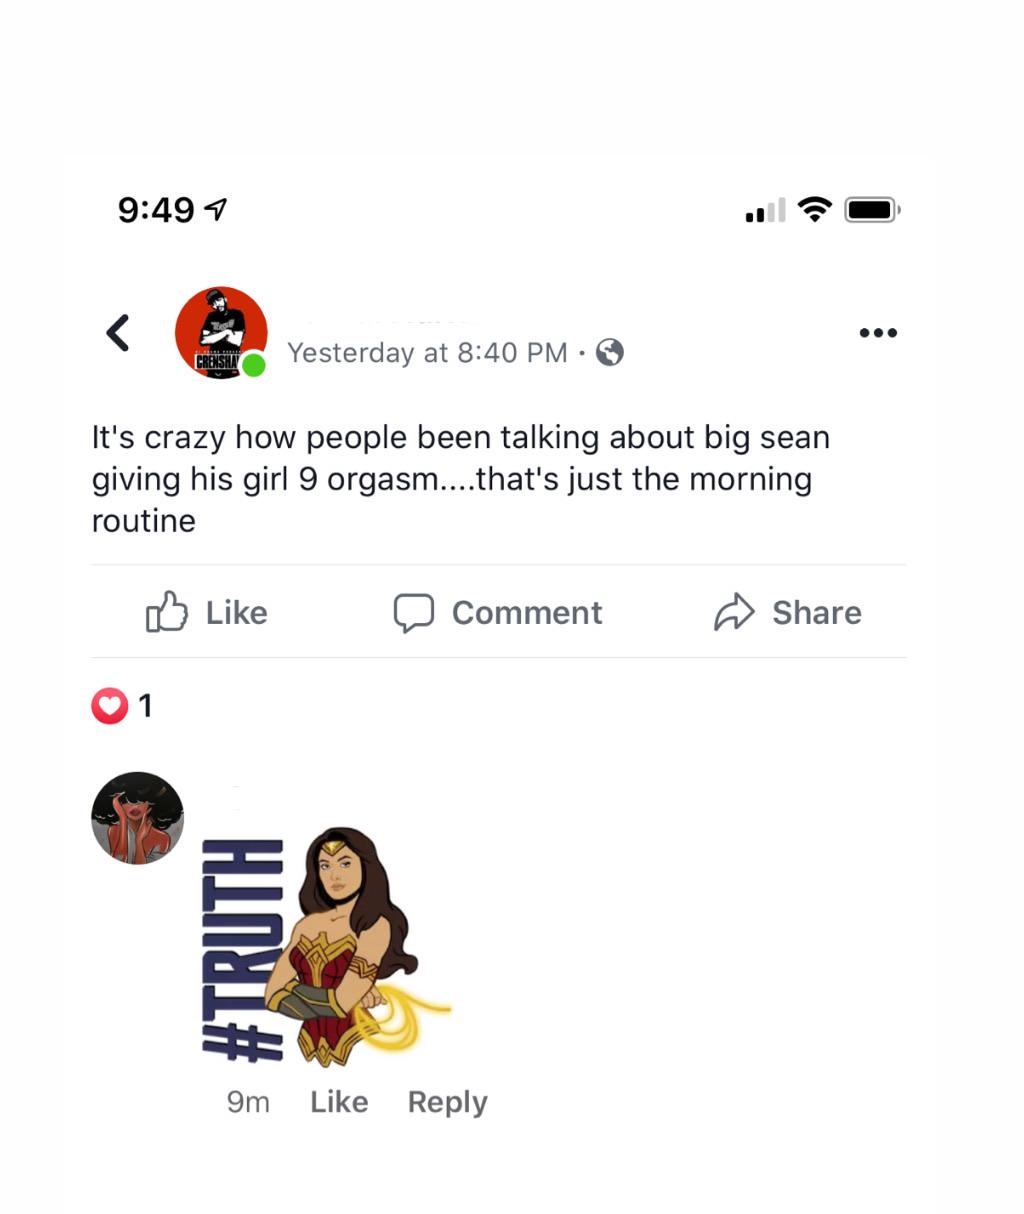 icon - 7 Yesterday at It's crazy how people been talking about big sean giving his girl 9 orgasm....that's just the morning routine a Comment 9m